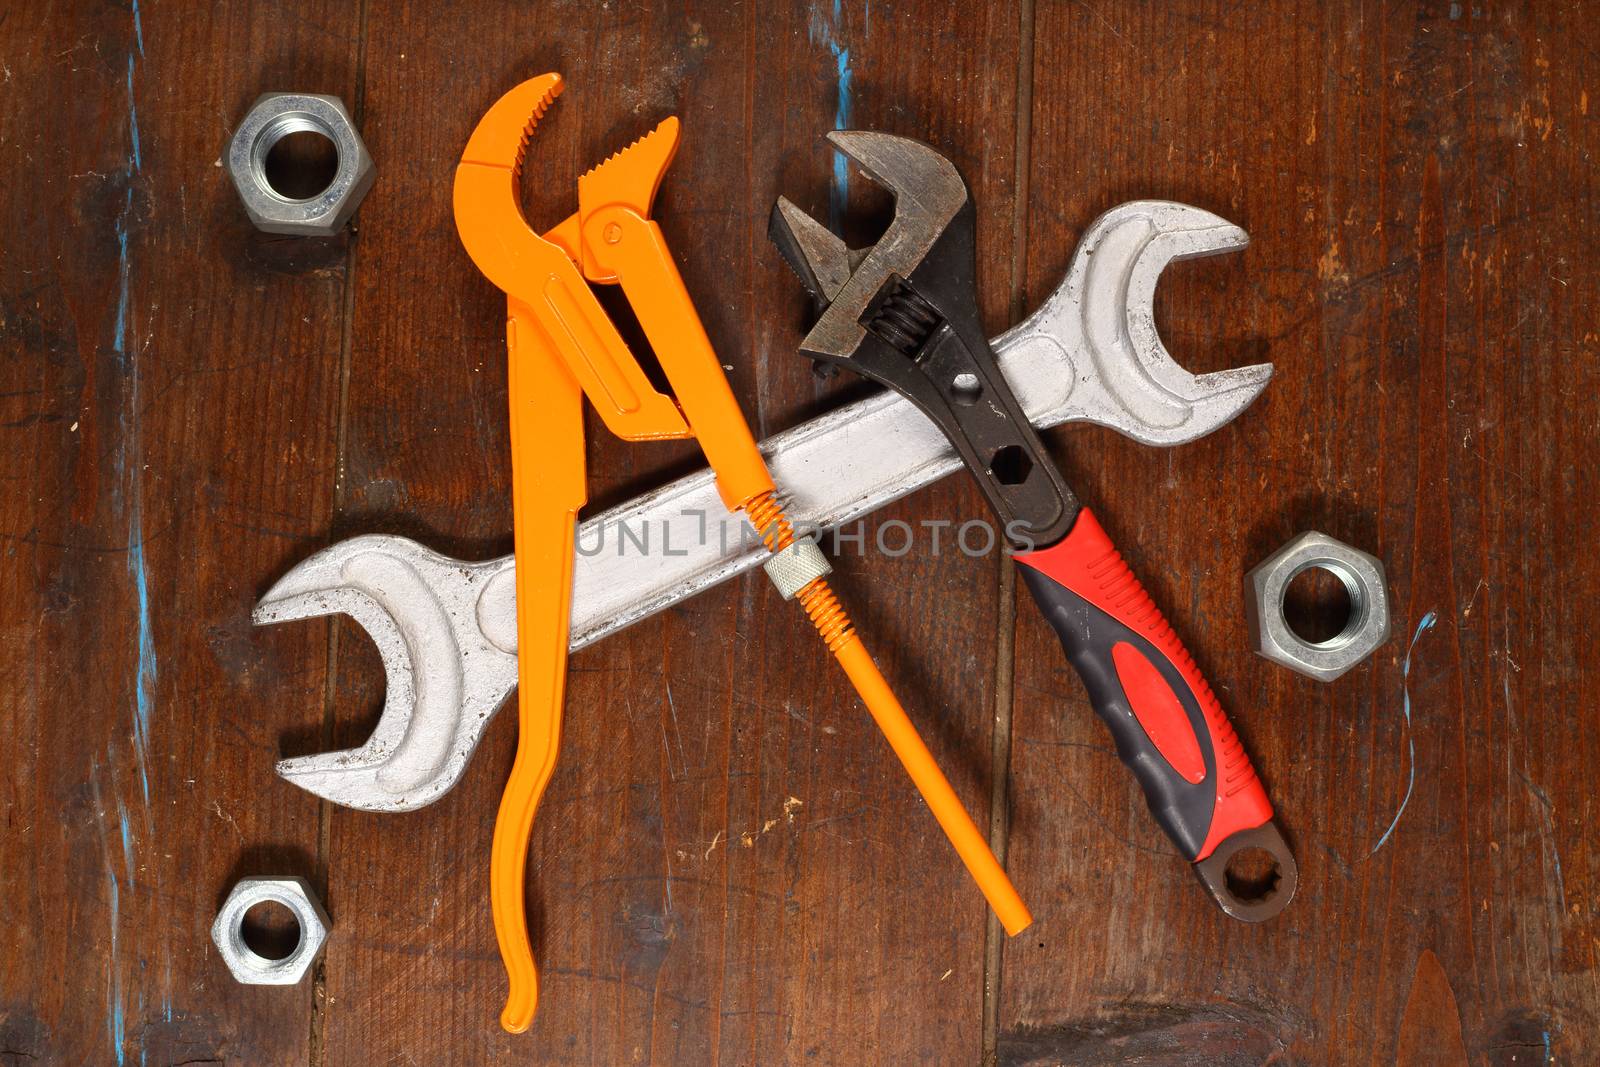  wrenches by alexkosev